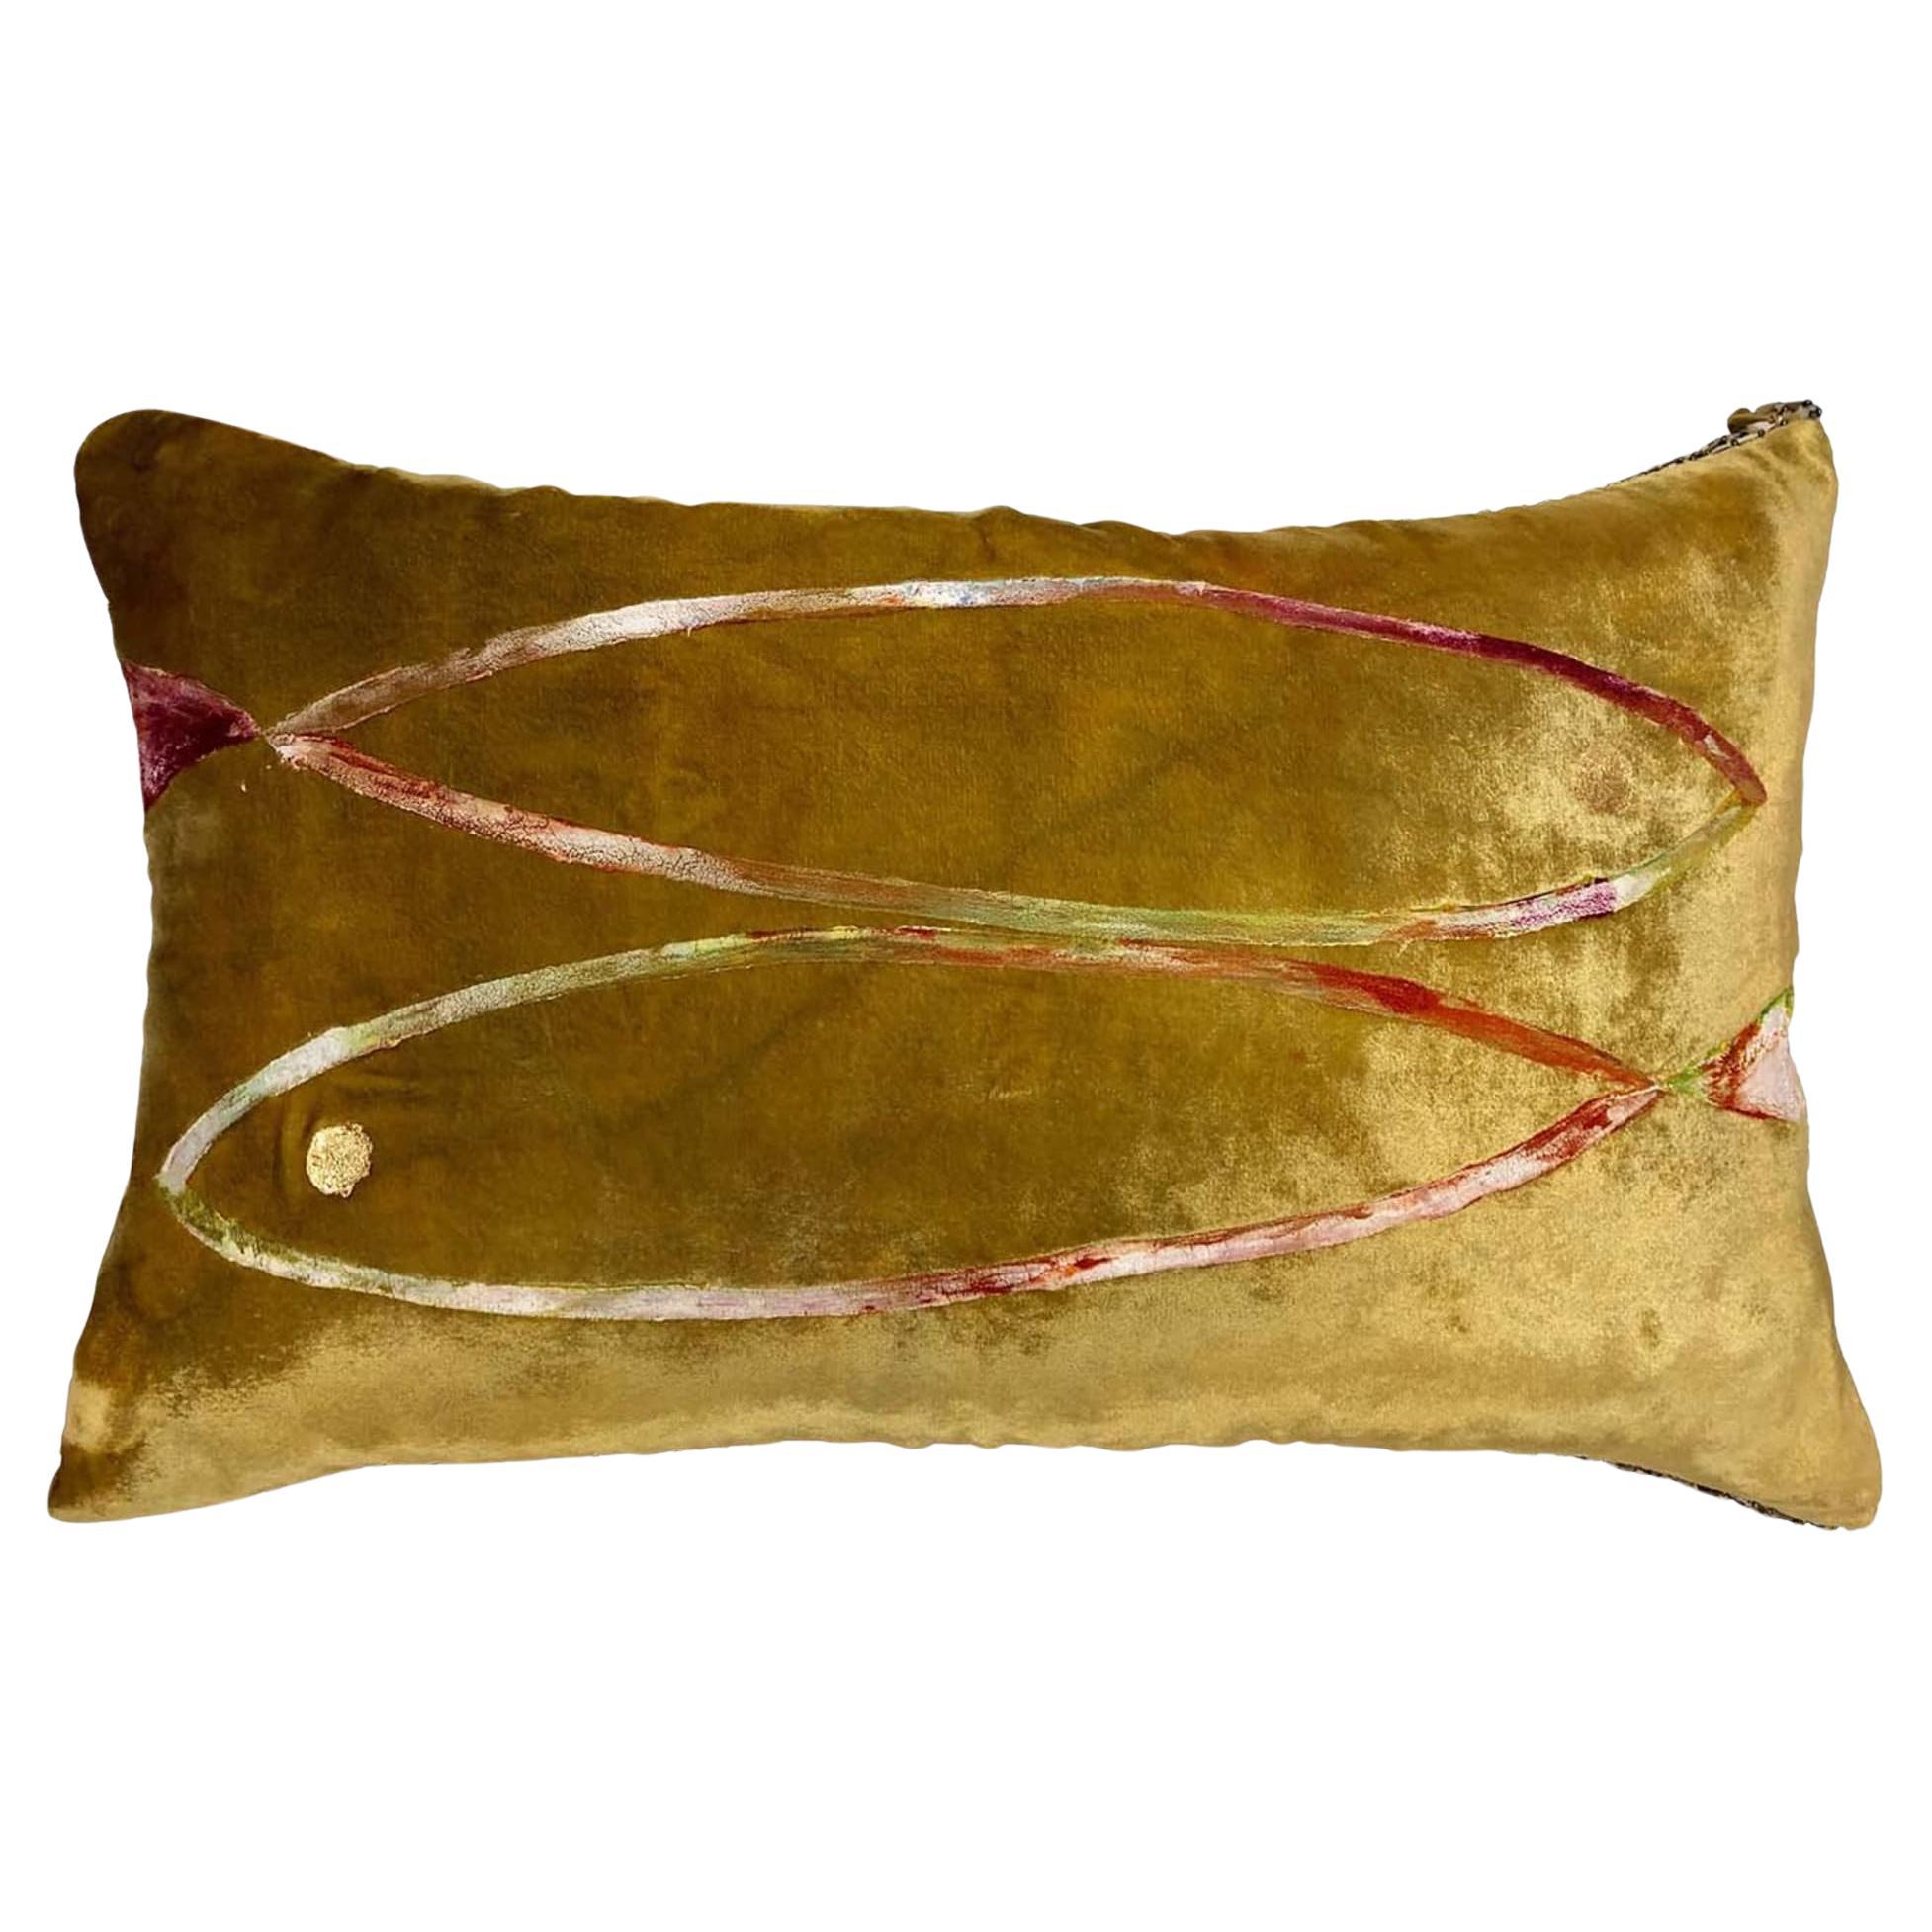 Two Fishes Cushion